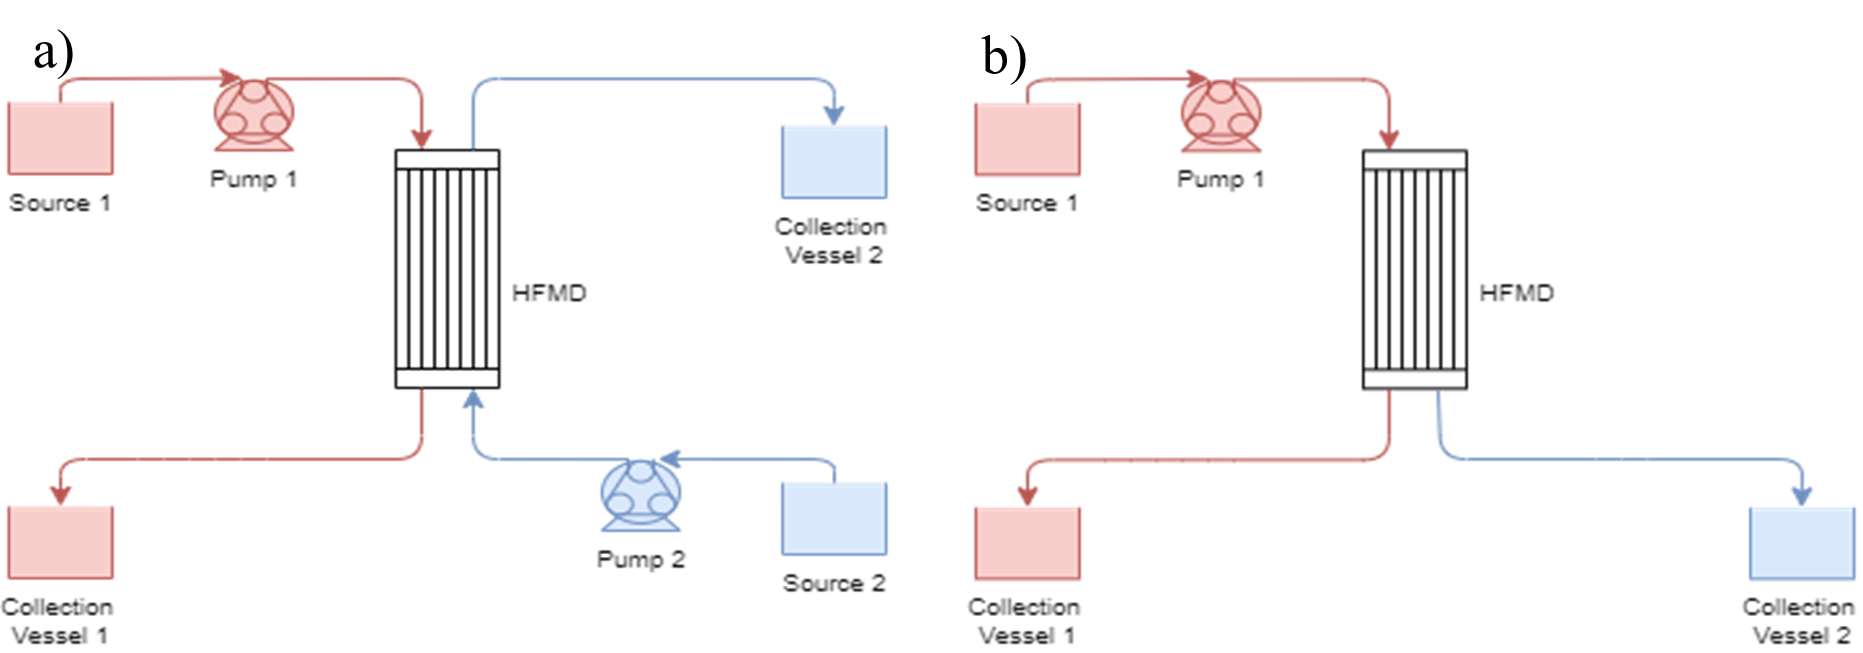 Figure 1: Experimental set-up of hollow fibre membrane dialyser (HFMD)
with a) two liquid loops, loop 1 (red) and loop 2 (blue) running through shell
and tube respectively or b) one loop (red) running through the shell or tube
while the other is open to the atmosphere.